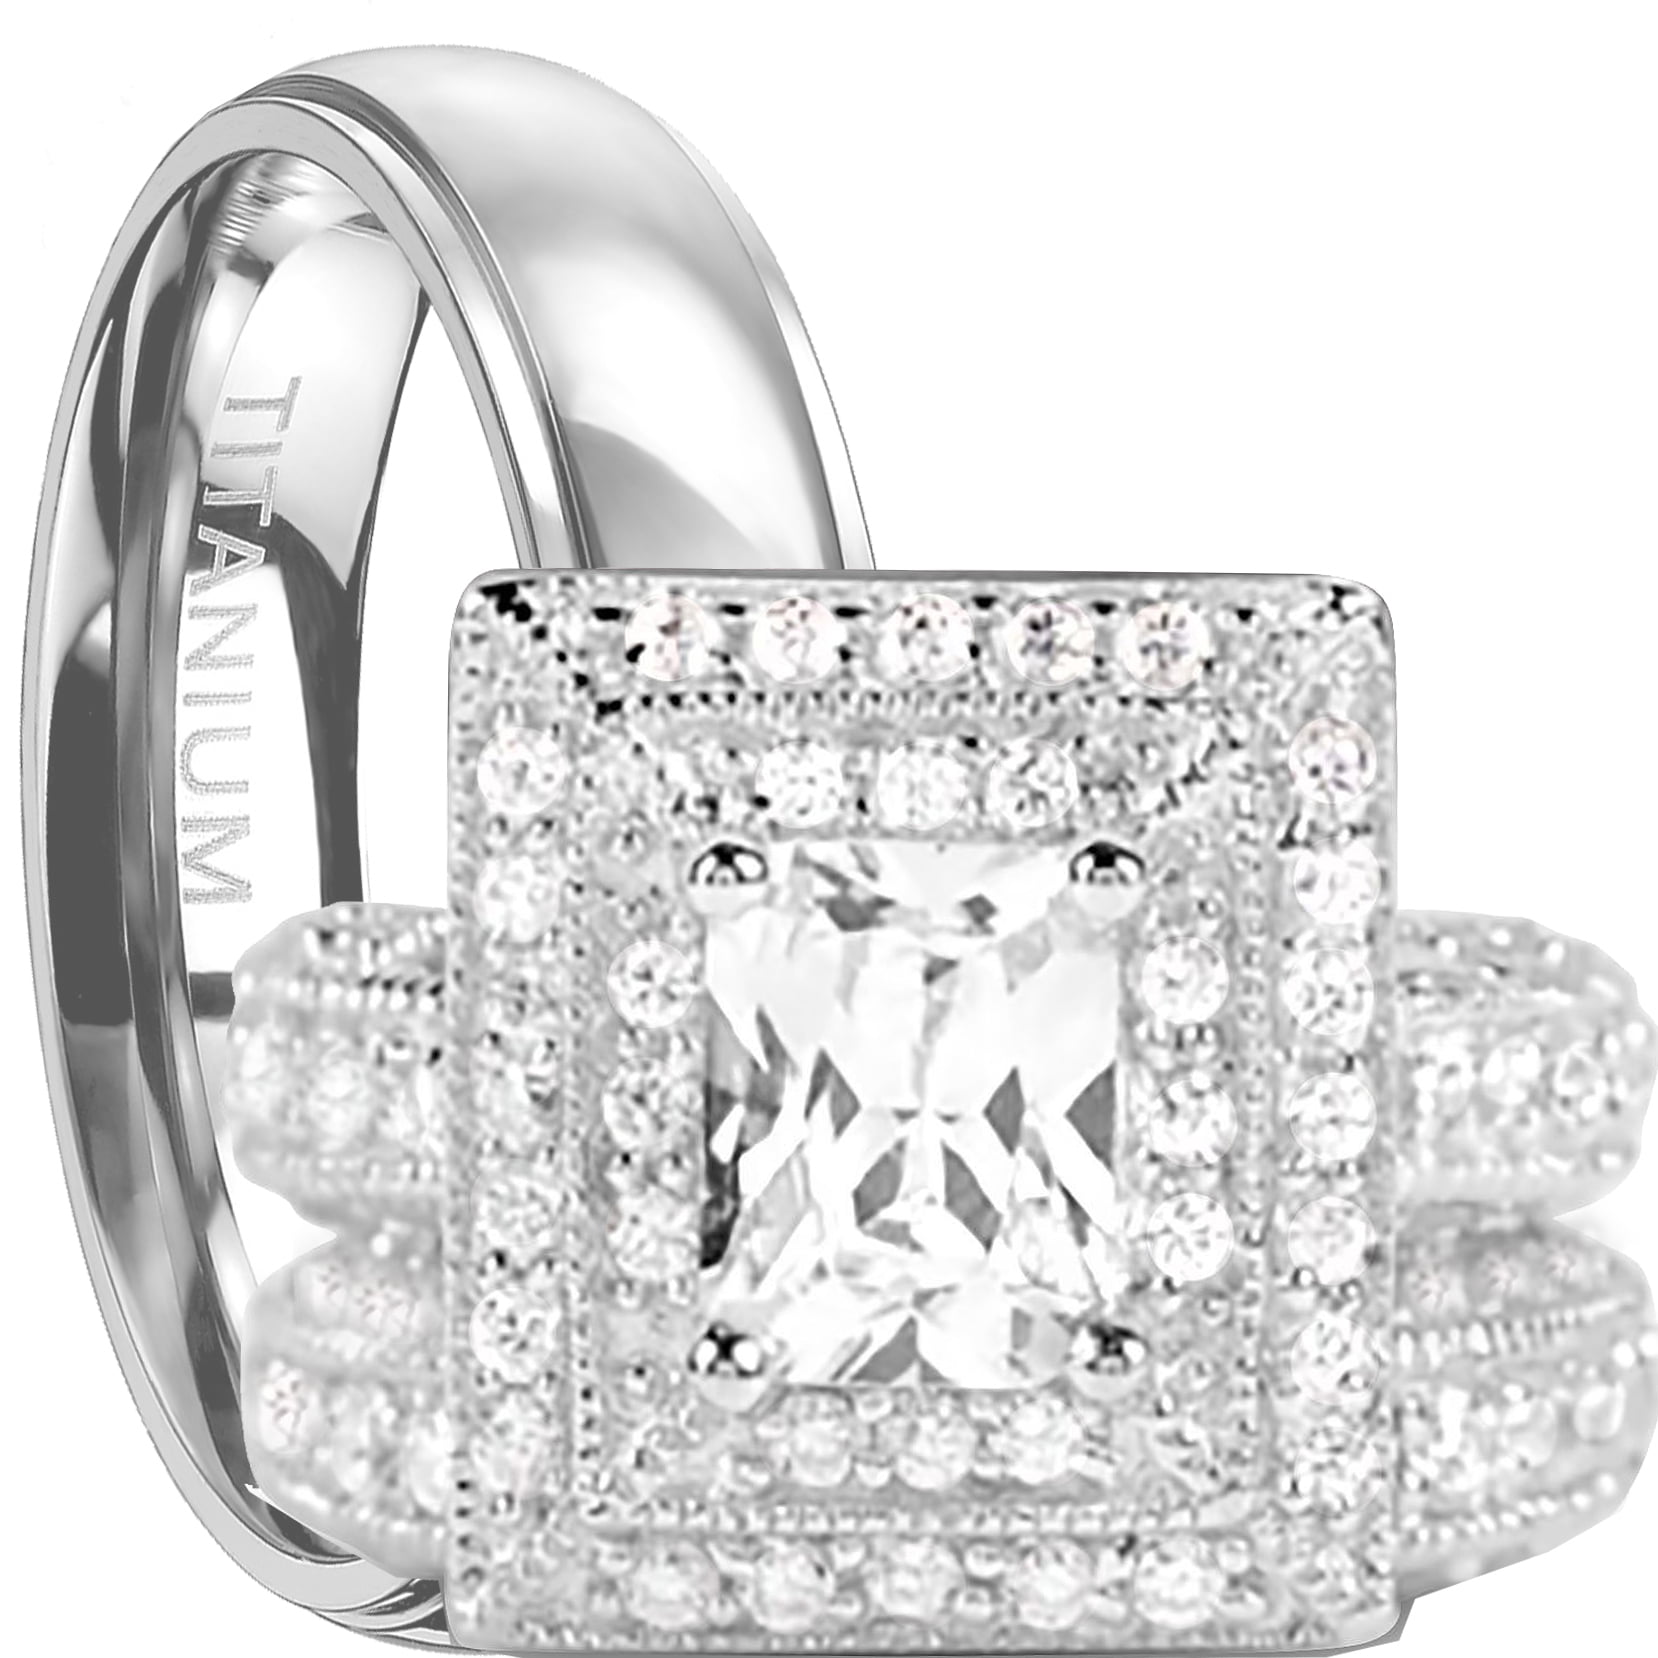 2.60 CT HALO ROUND CUT CZ STERLING SILVER WEDDING RING SET WOMEN'S SIZE 5-9 